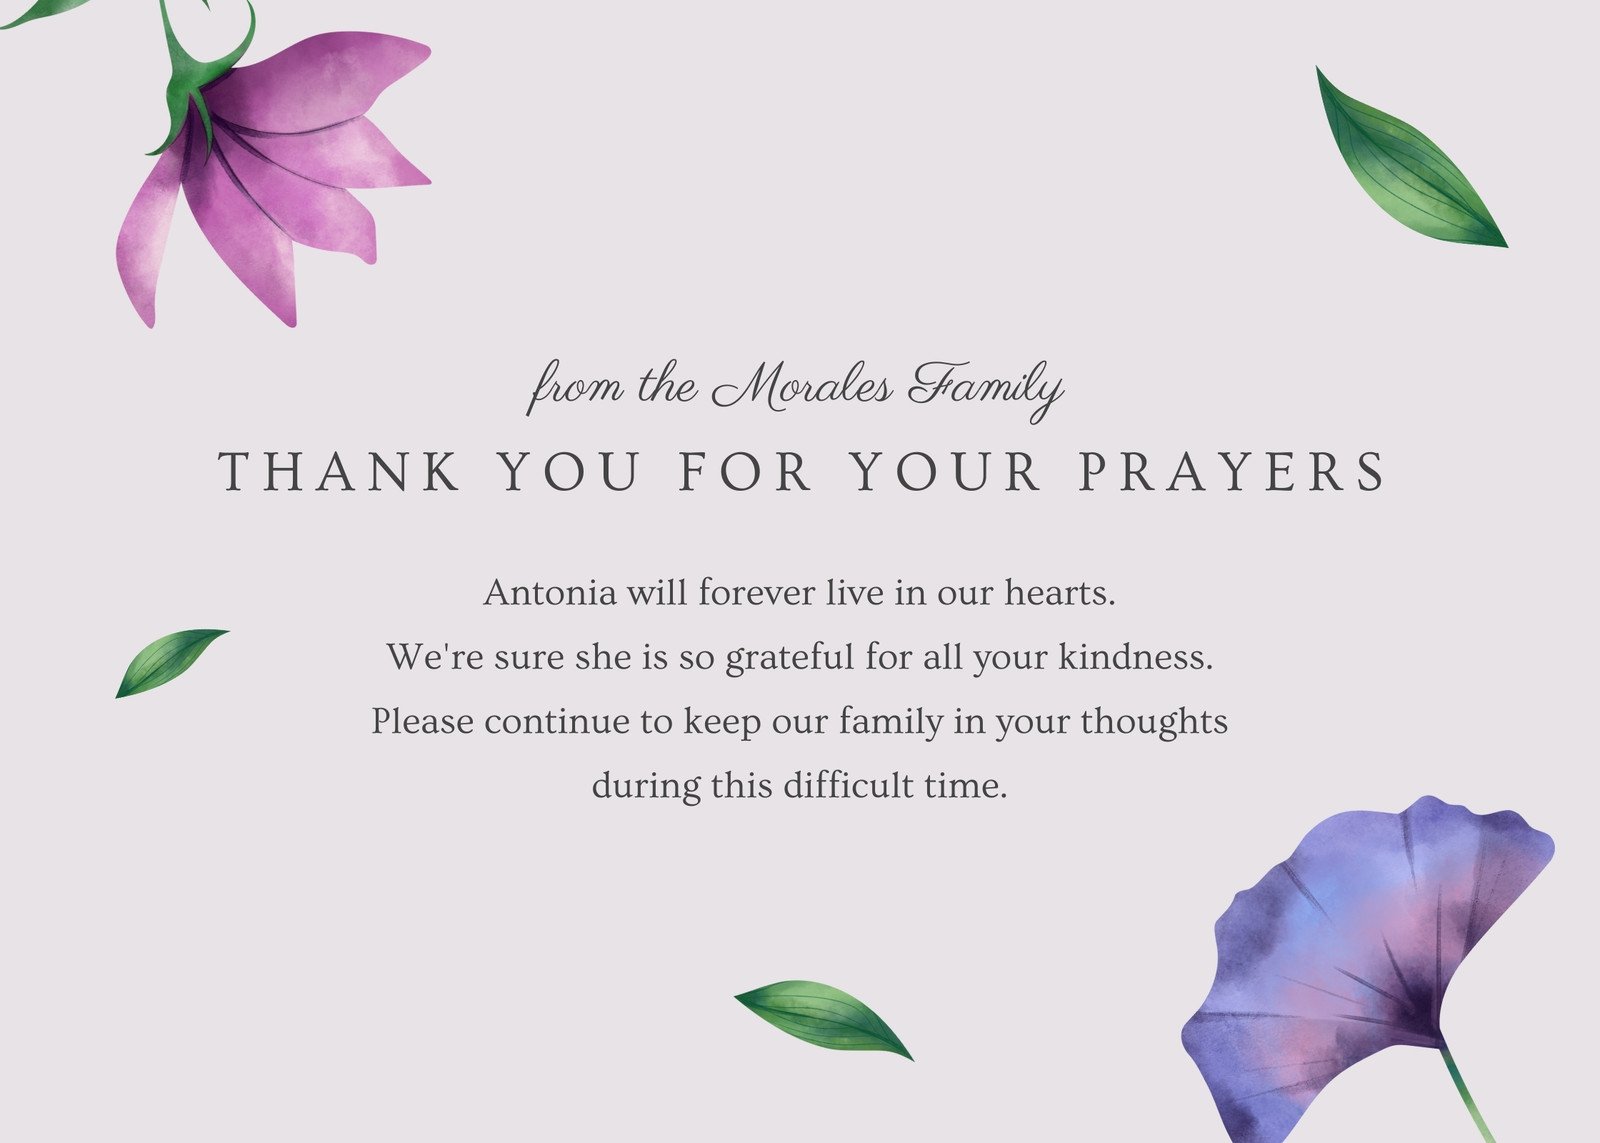 Thank You Card For Funeral Template